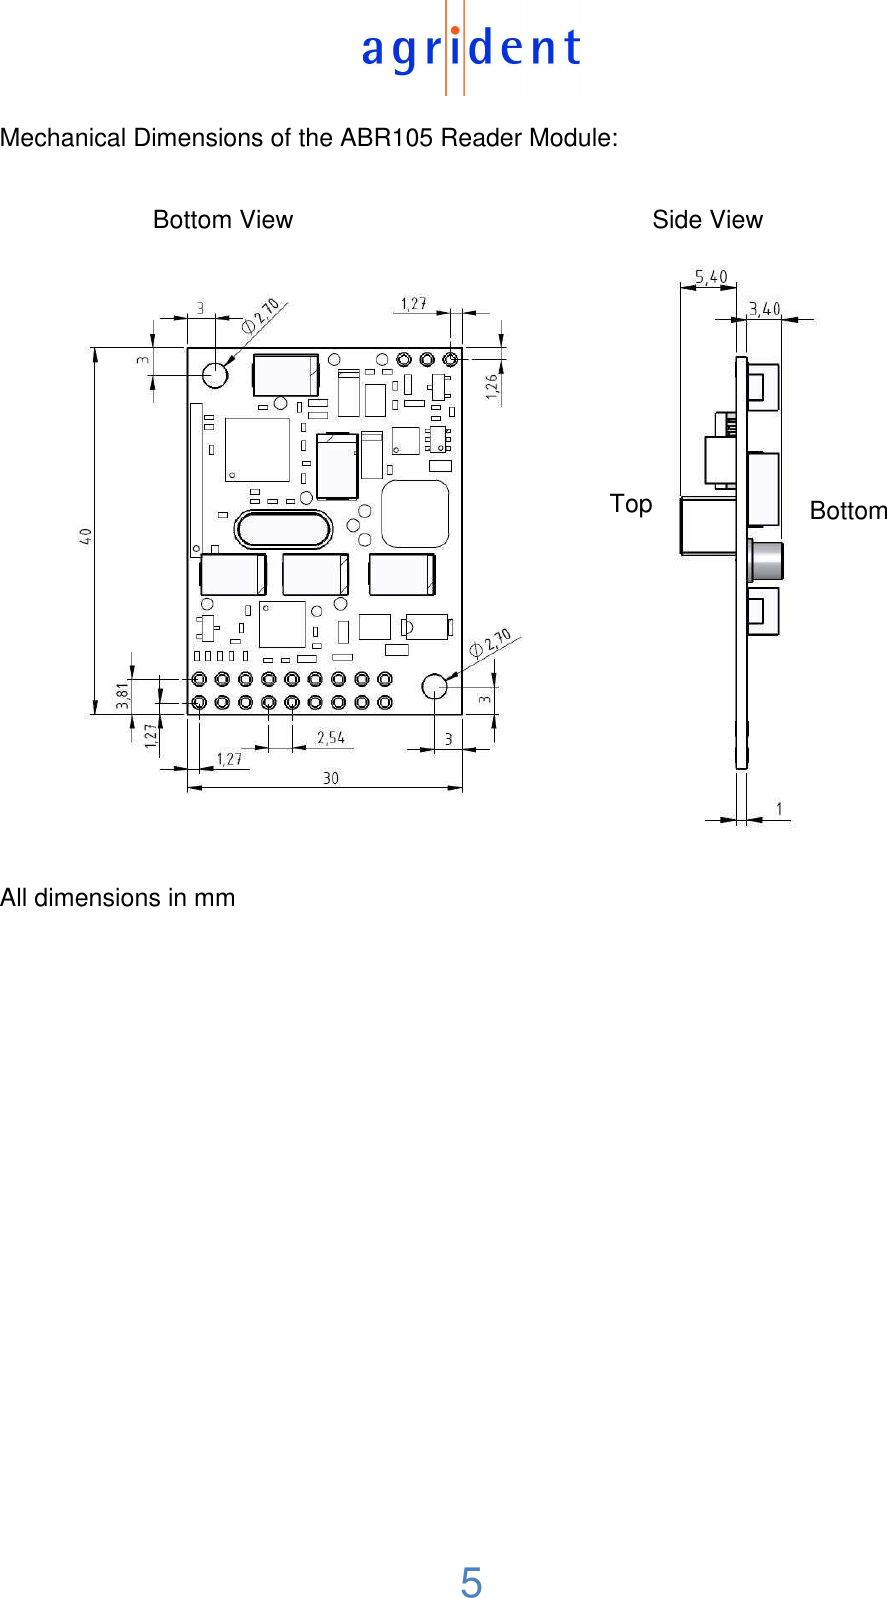  5  Mechanical Dimensions of the ABR105 Reader Module:                 Bottom View                  Side View        All dimensions in mm Top  Bottom 